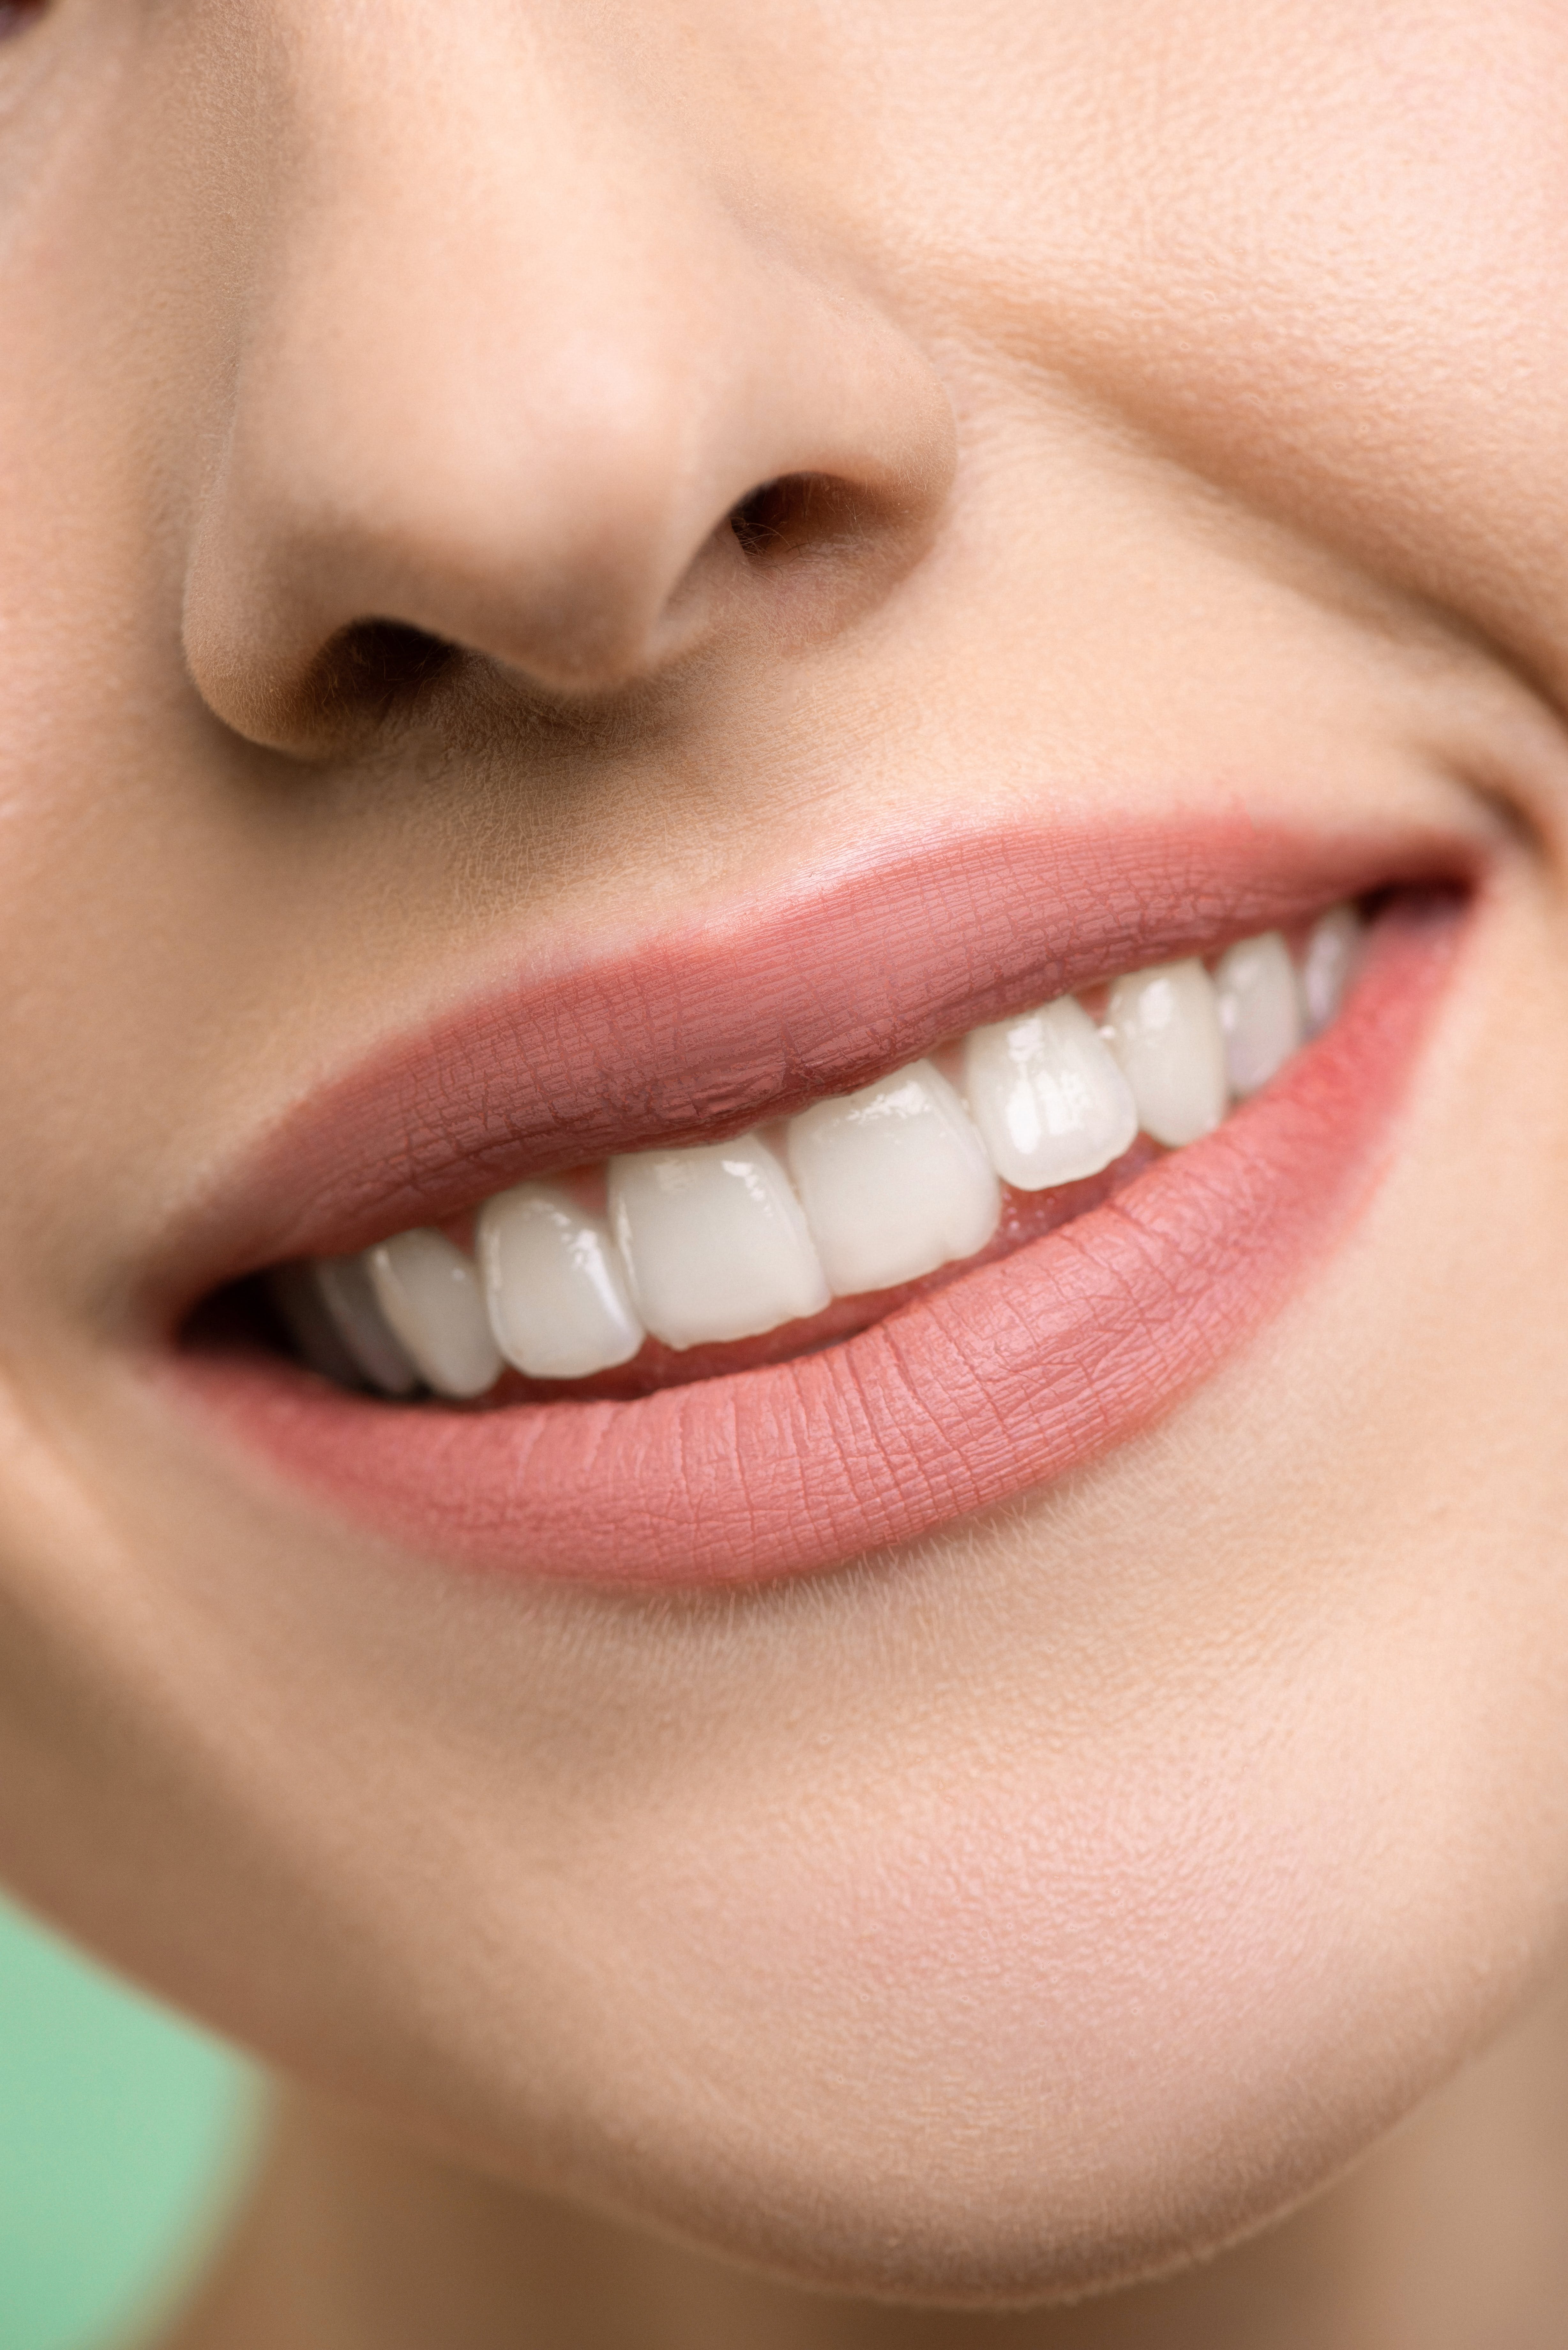 Is Colombia a Good Destination for Veneers?